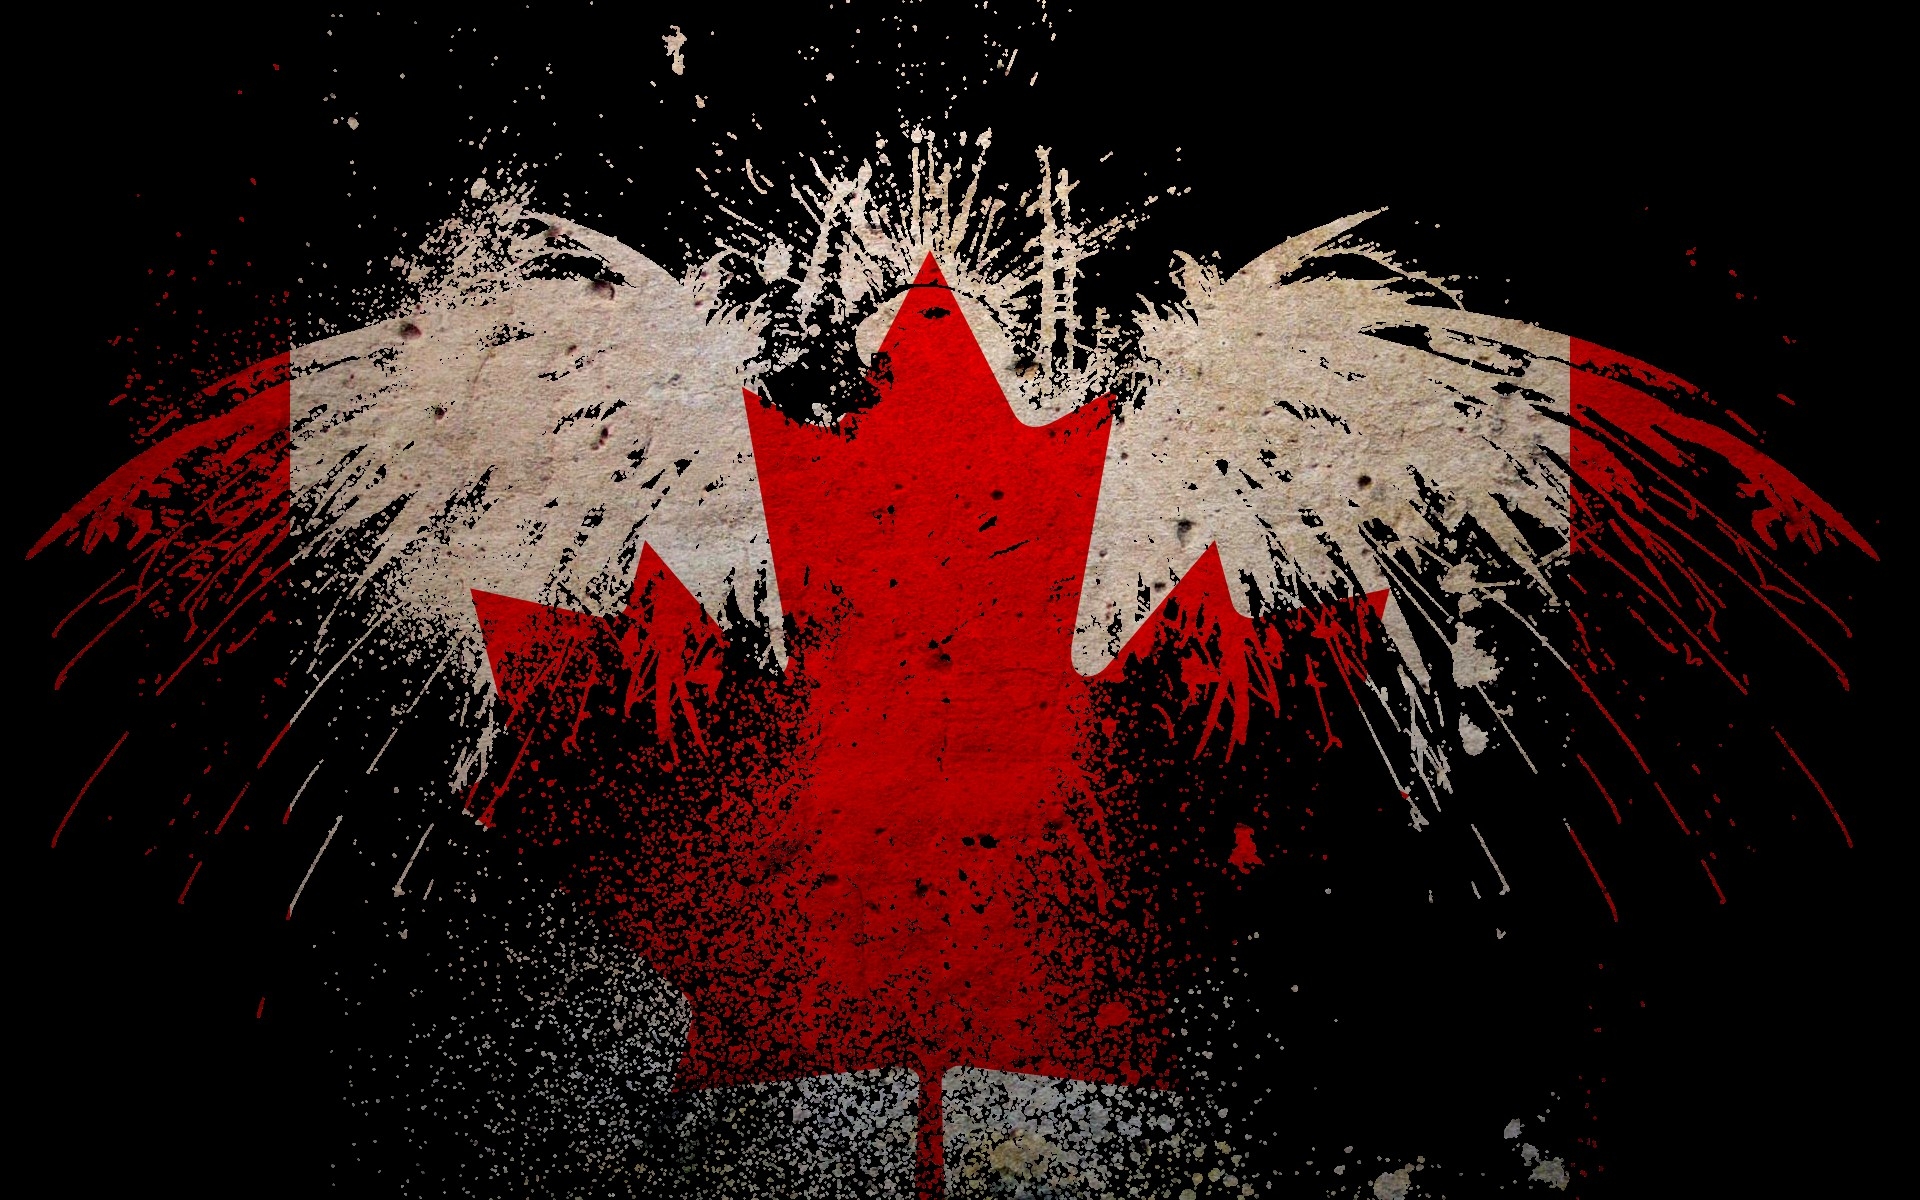 eagles canada flags black background 1920x1200 wallpaper High Quality Wallpaper, High Definition Wallpaper